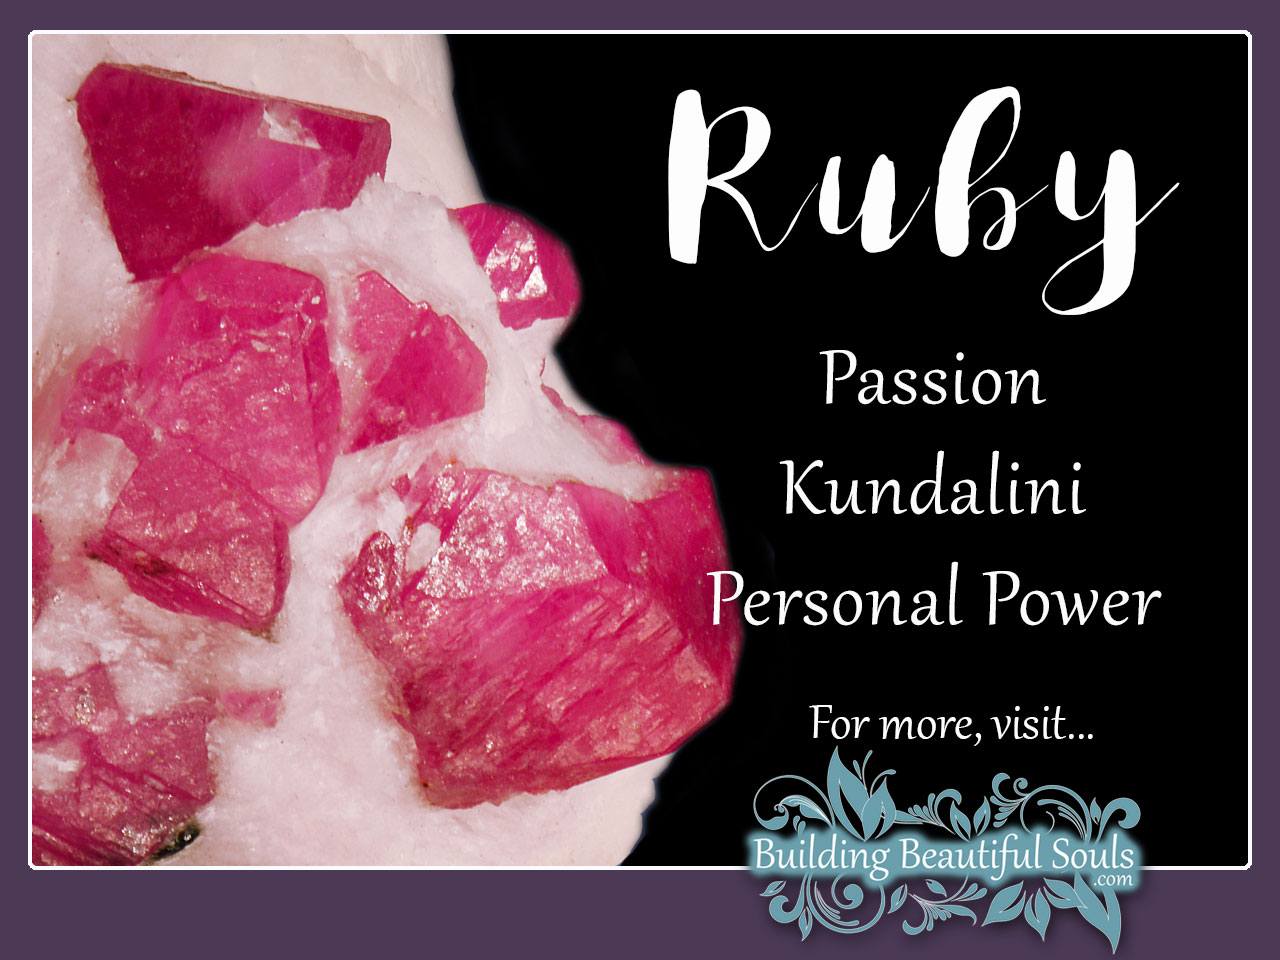 What Is The Spiritual Meaning Of Ruby?